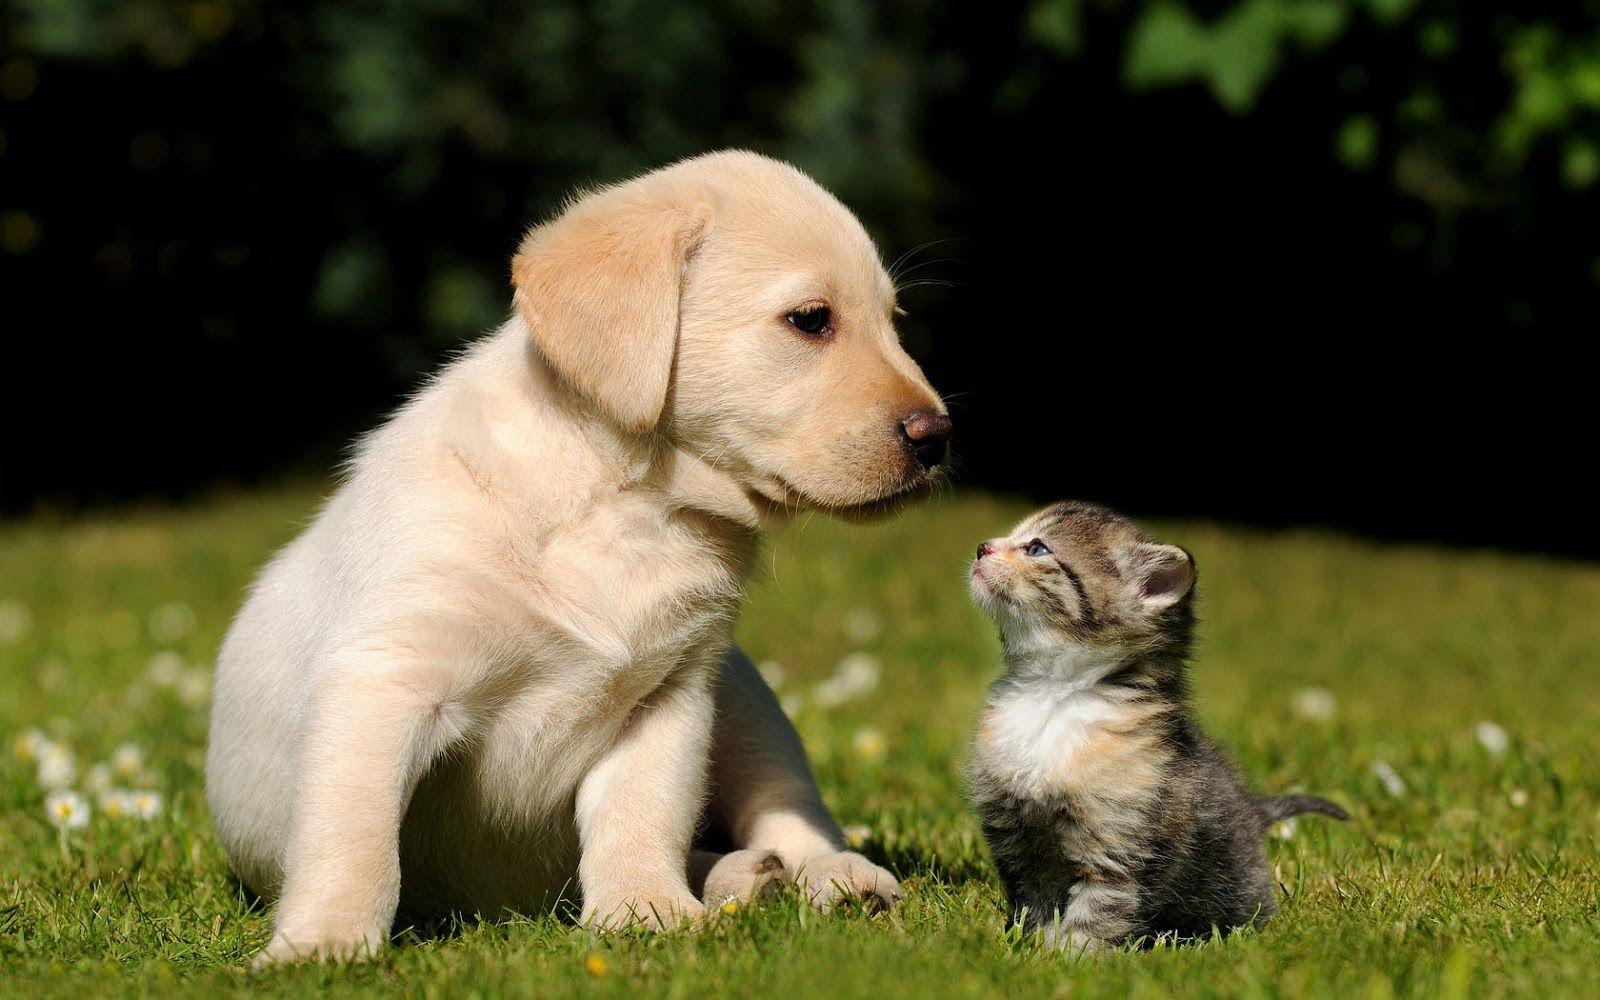 Cat and dog on the grass wallpaper. HD Animals Wallpaper